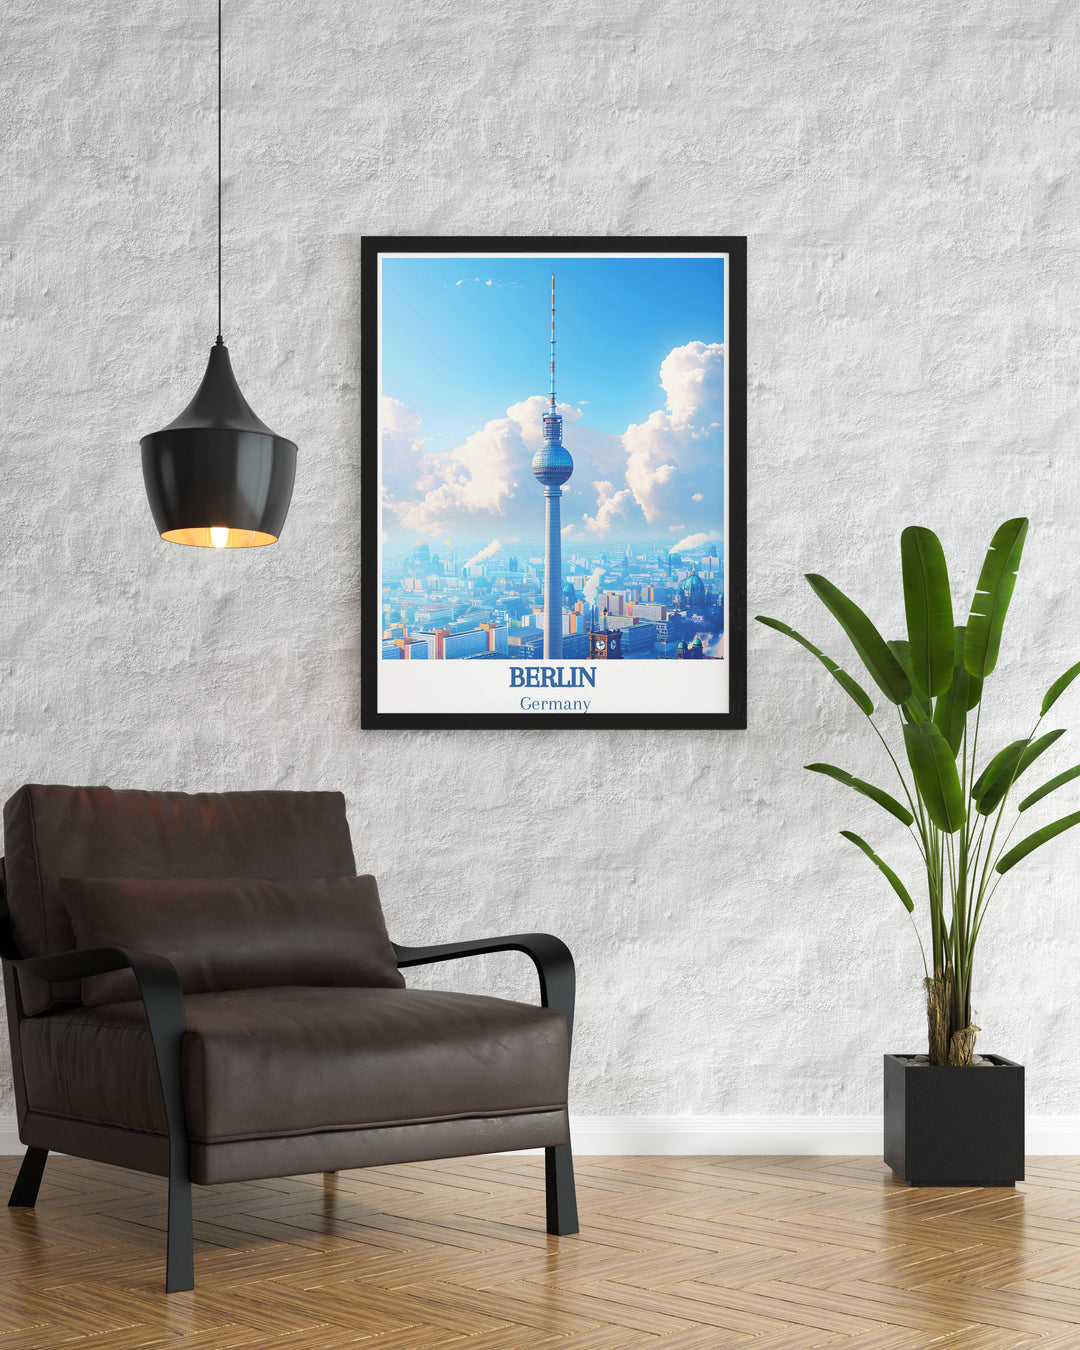 Artistic representation of the Berliner Fernsehturm set against the Berlin skyline a perfect Berlin gift for art lovers.